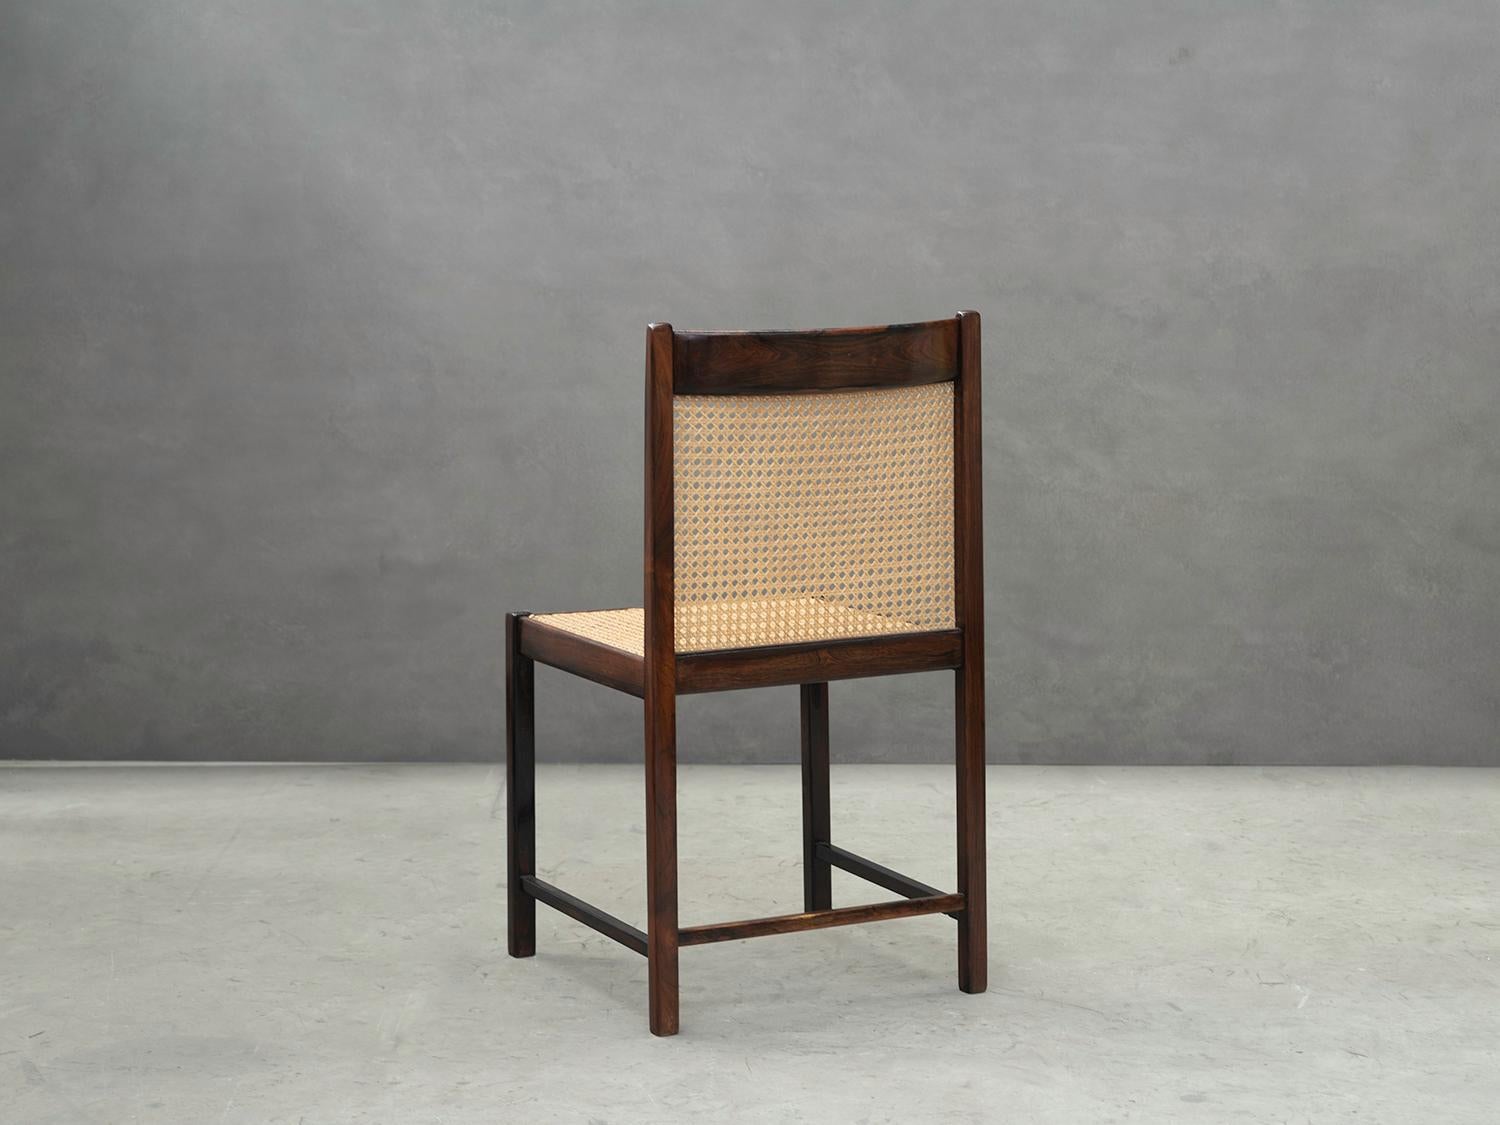 The set of six Brazilian Mid-Century Modern dining chairs are made of rosewood (Jacaranda) and cane seat.

The structure has a square section design with four feet, made in solid rosewood. 

The curved backrest is composed of rosewood and cane,